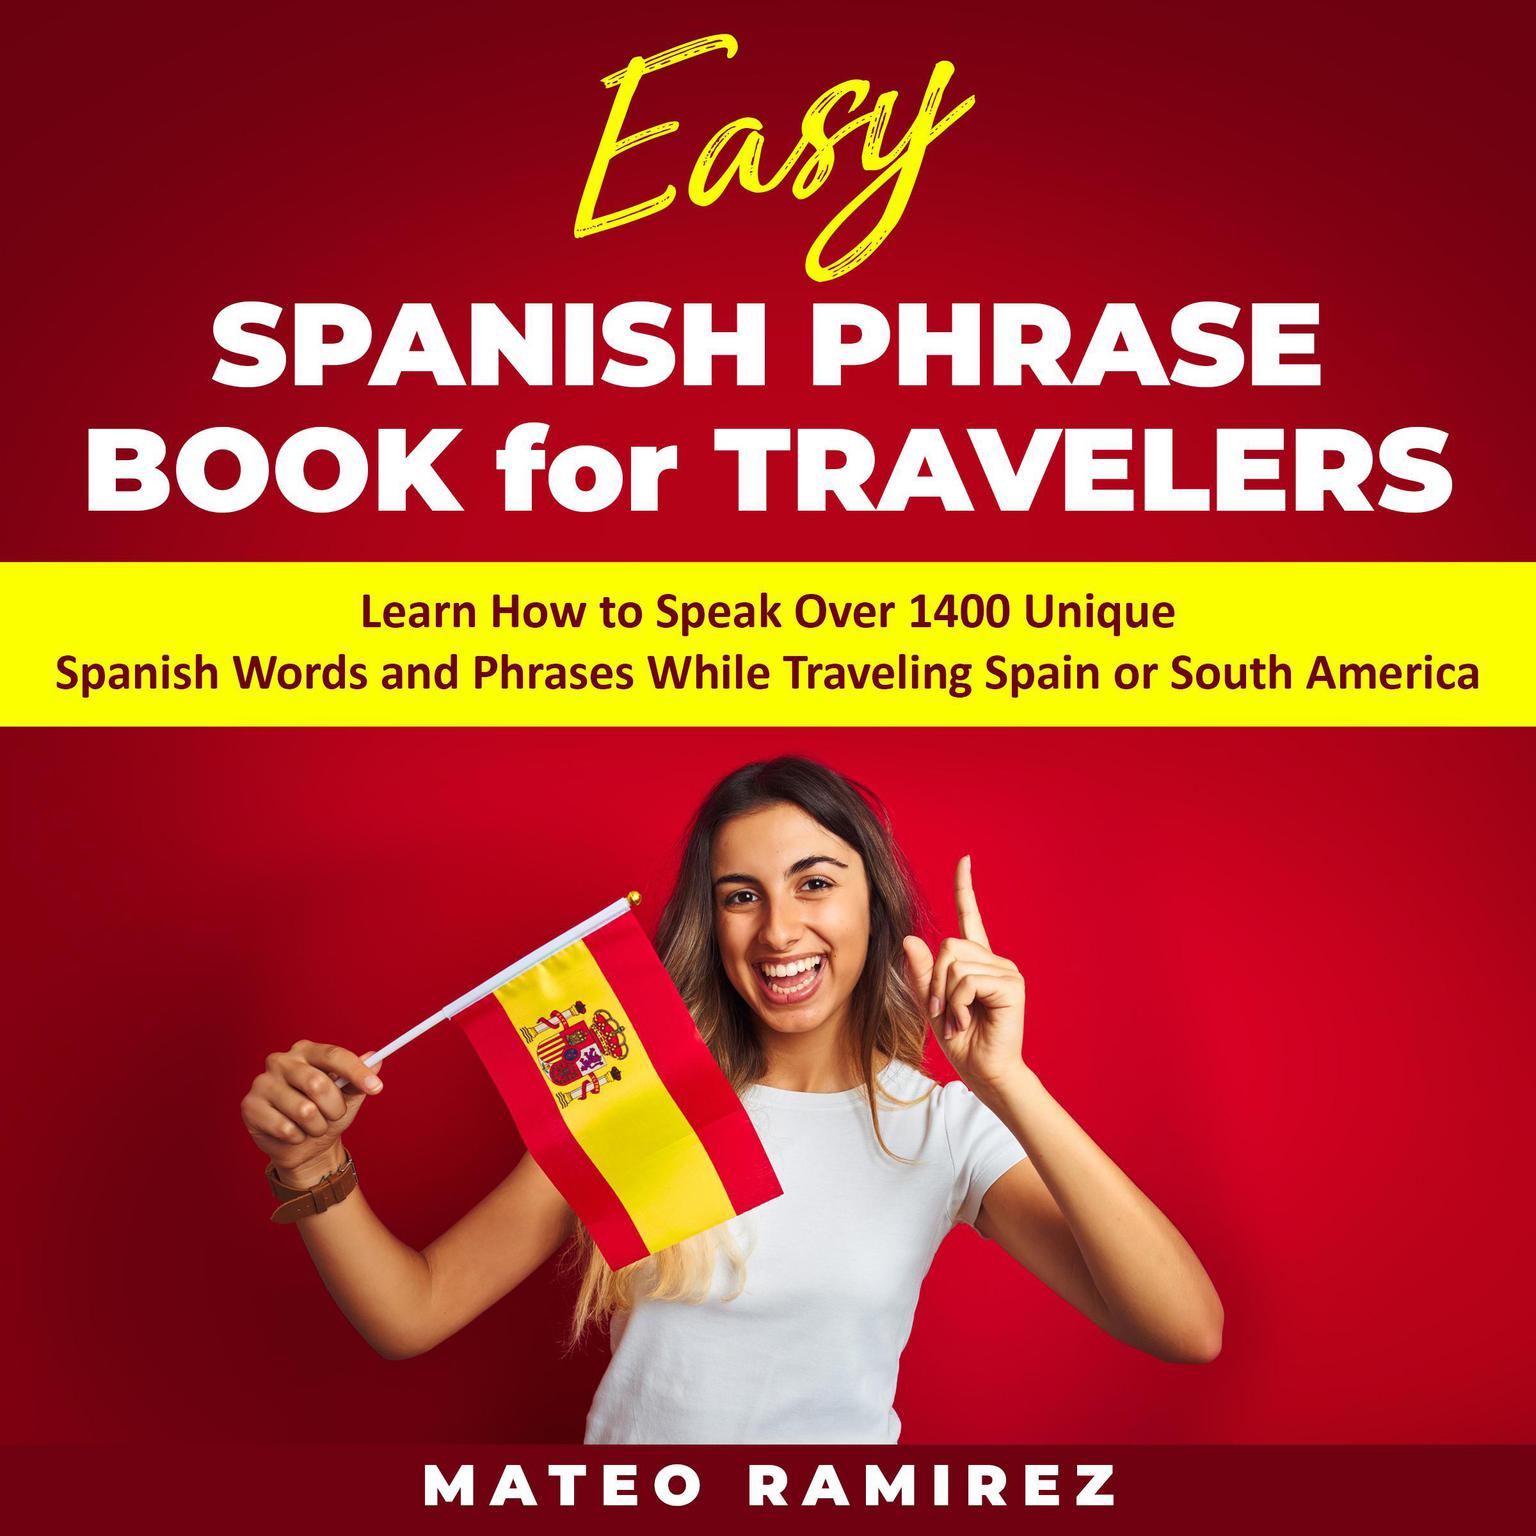 Easy Spanish Phrase Book for Travelers: Learn How to Speak Over 1400 Unique Spanish Words and Phrases While Traveling Spain and South America: Learn How to Speak Over 1400 Unique Spanish Words and Phrases While Traveling Spain and South America Audiobook, by Mateo Ramirez